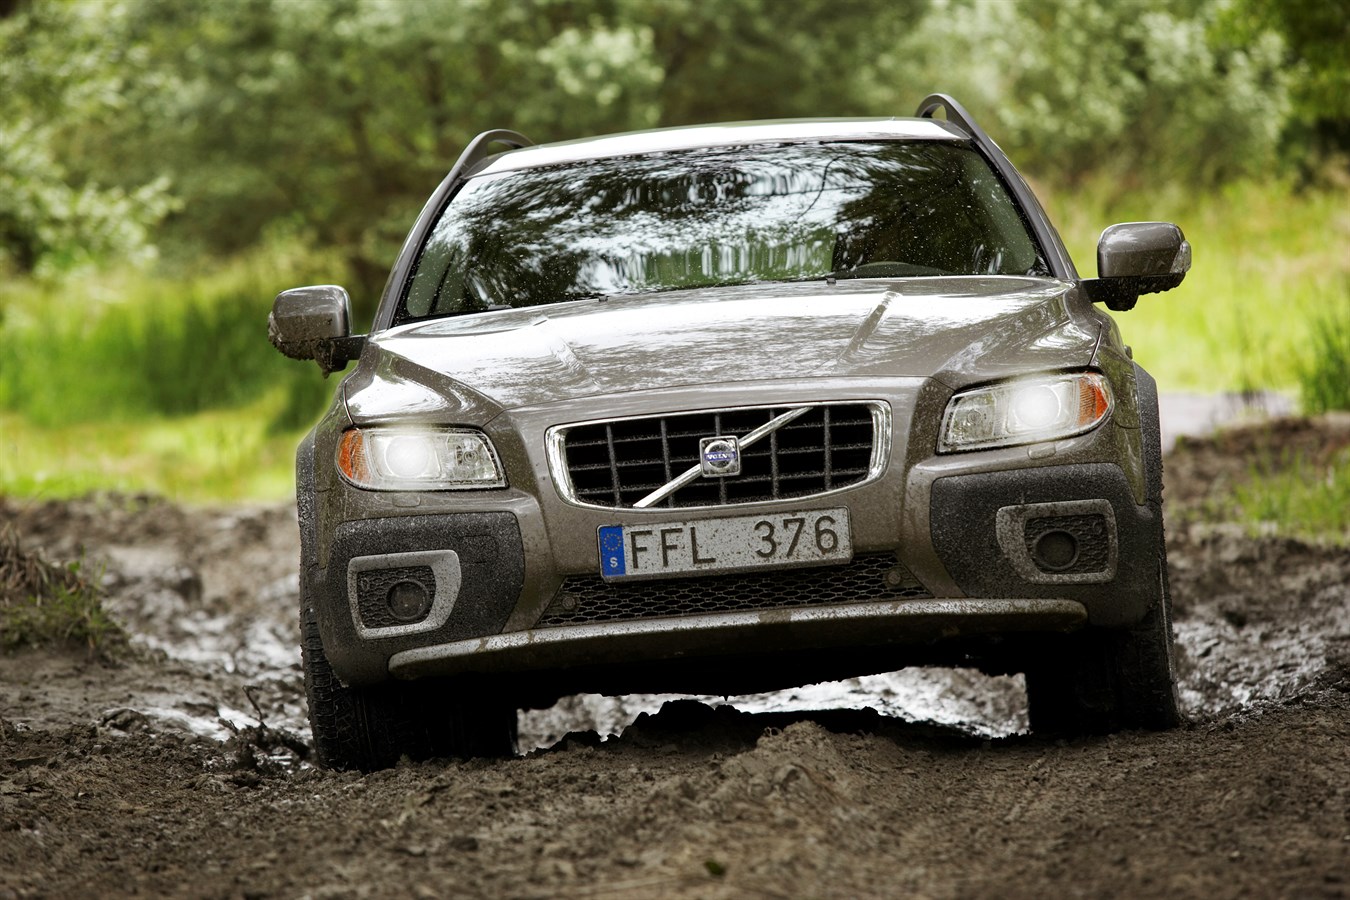 All-new Volvo XC70